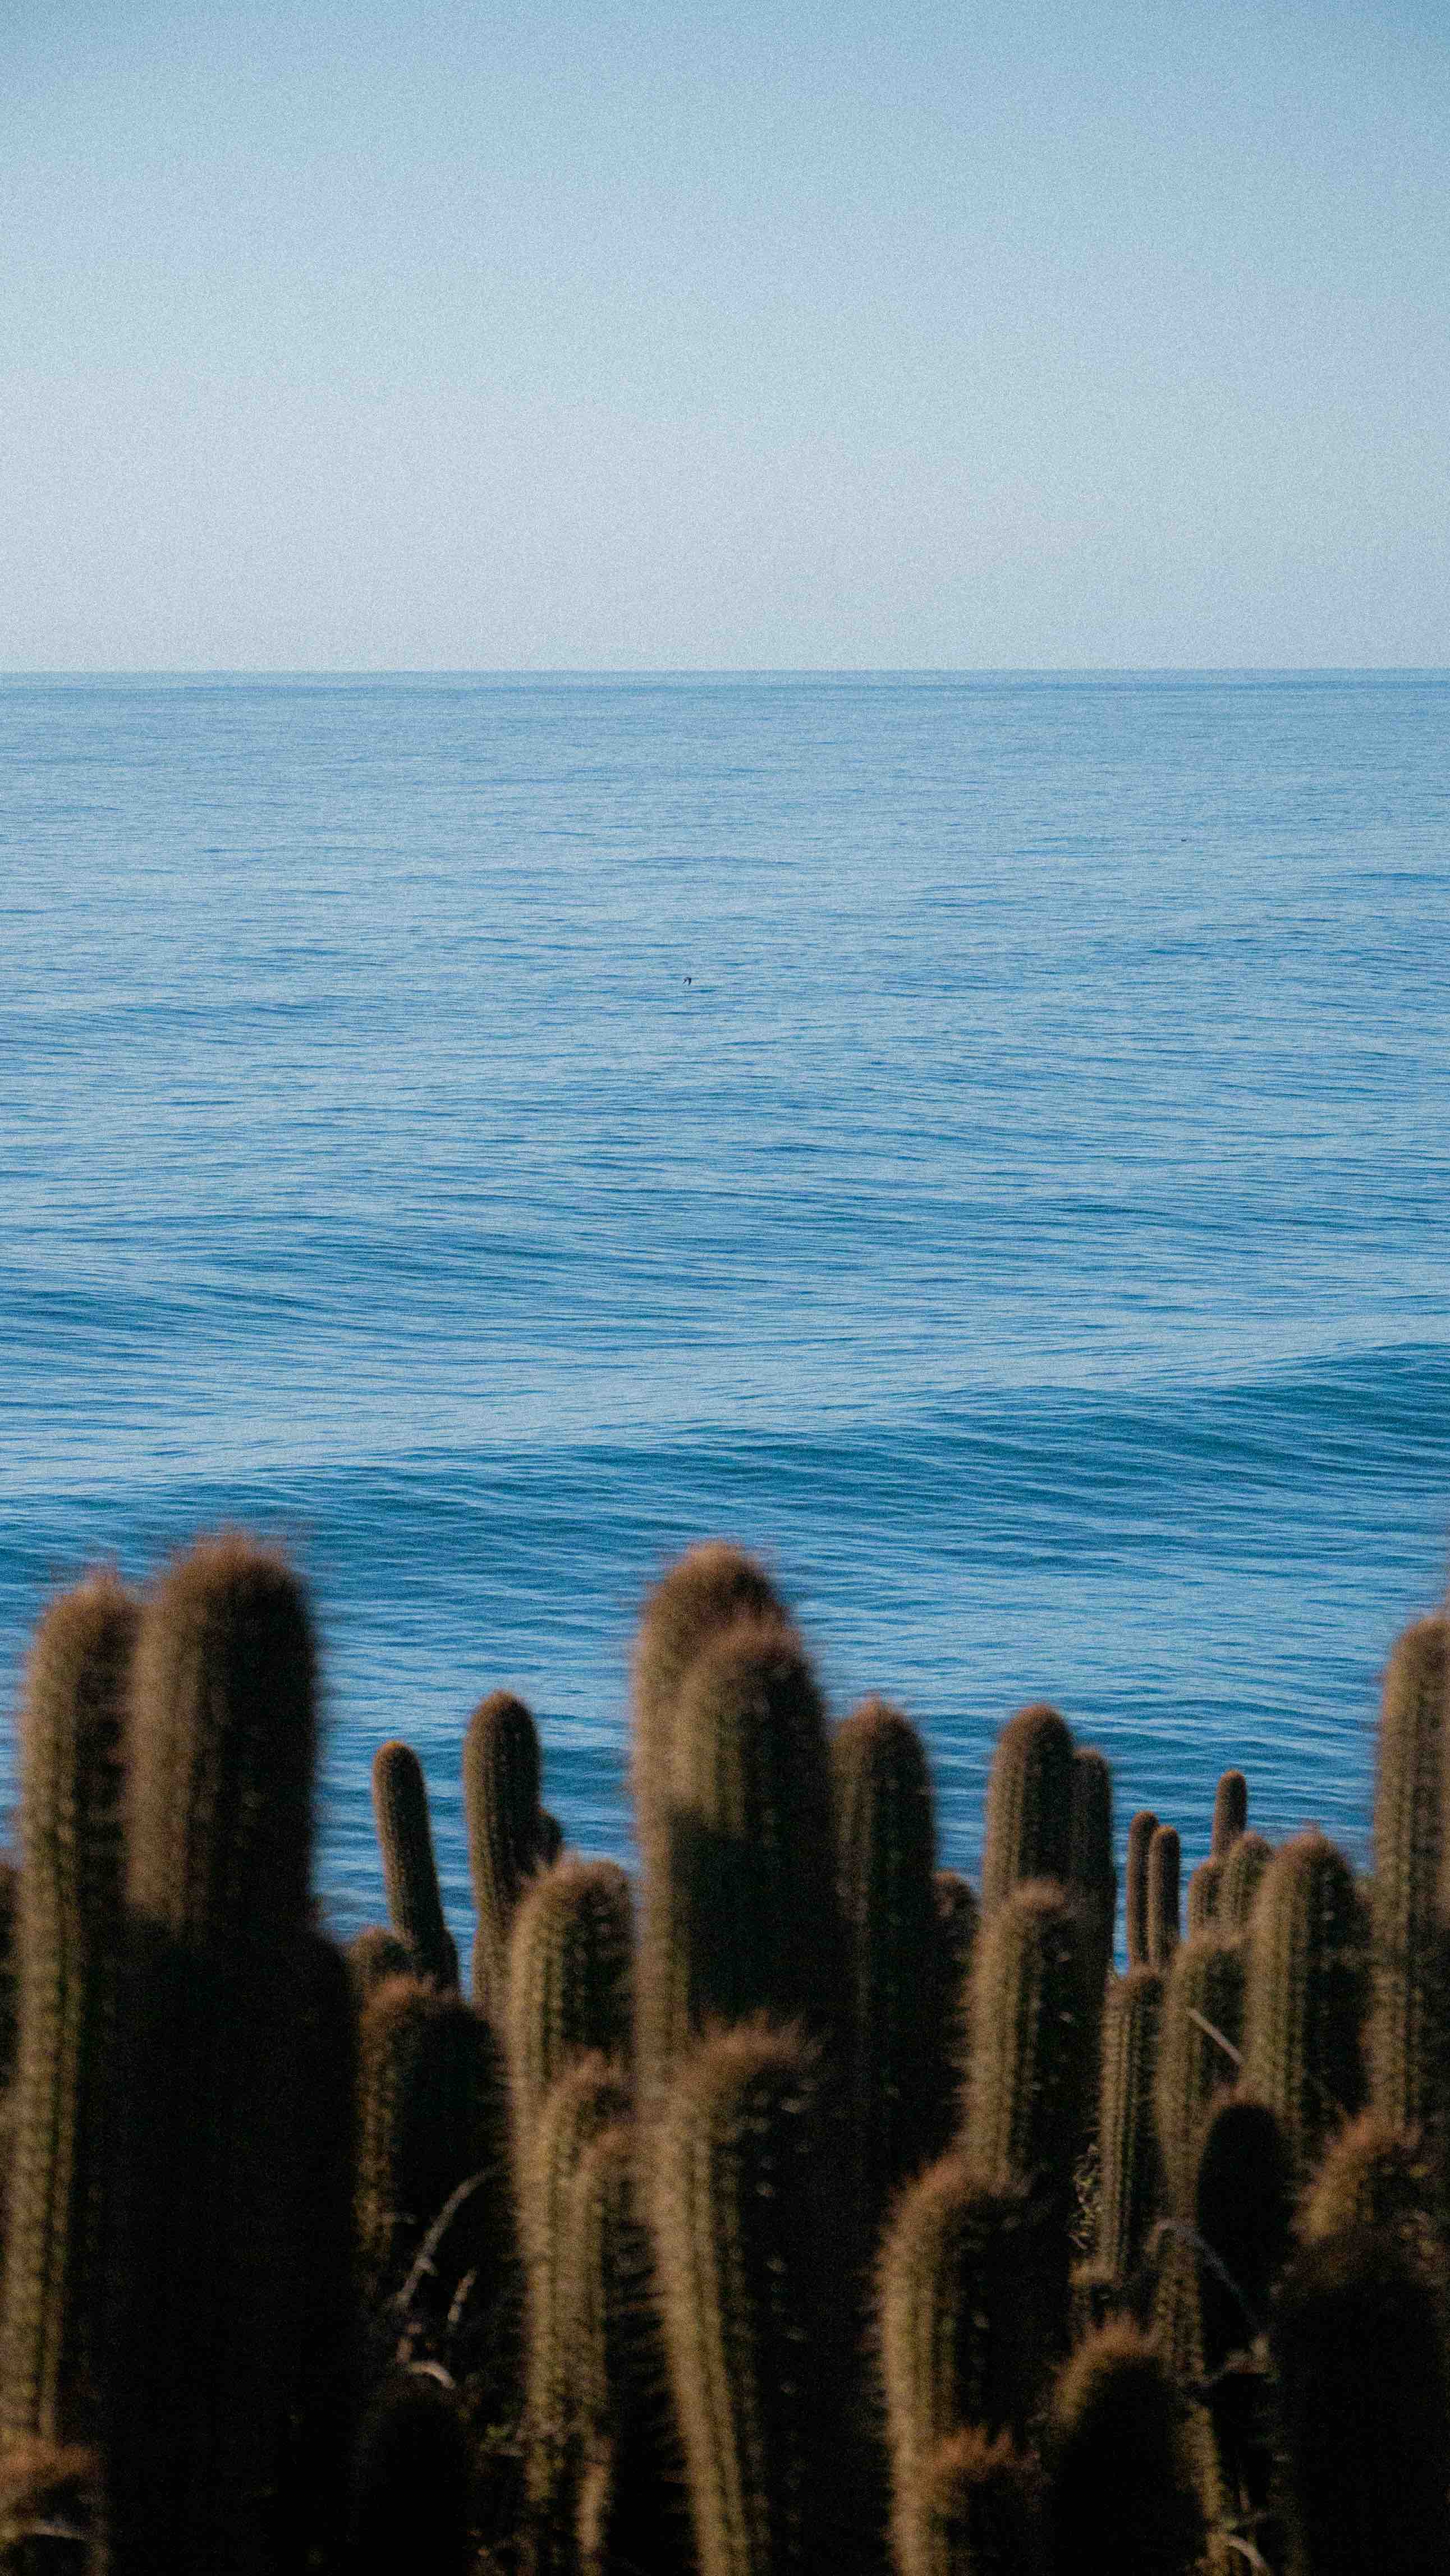 The ocean and some cacti